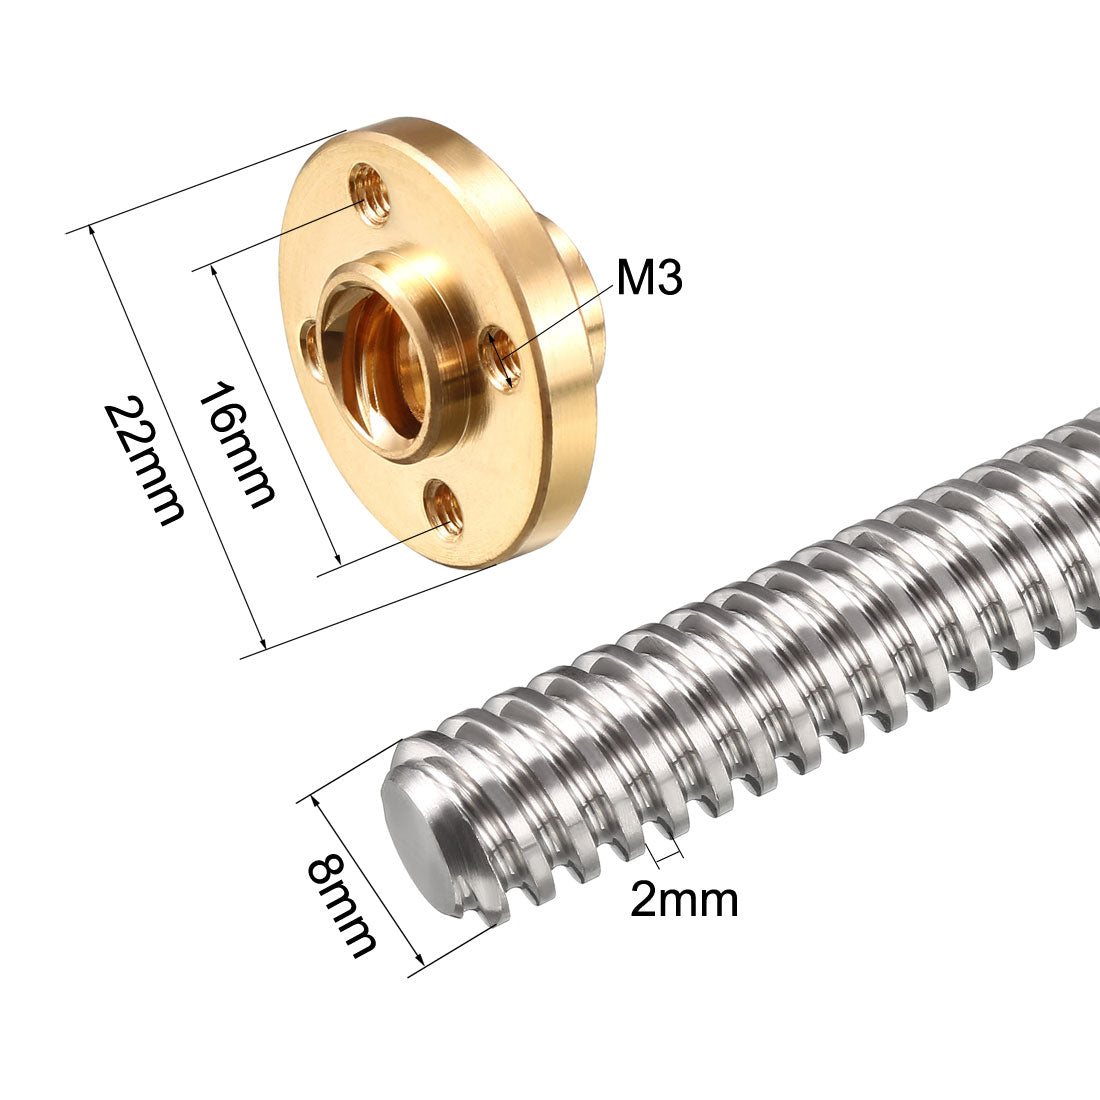 uxcell Uxcell 550mm T8 Pitch 2mm Lead 2mm Lead Screw Rod with Copper Nut for 3D Printer